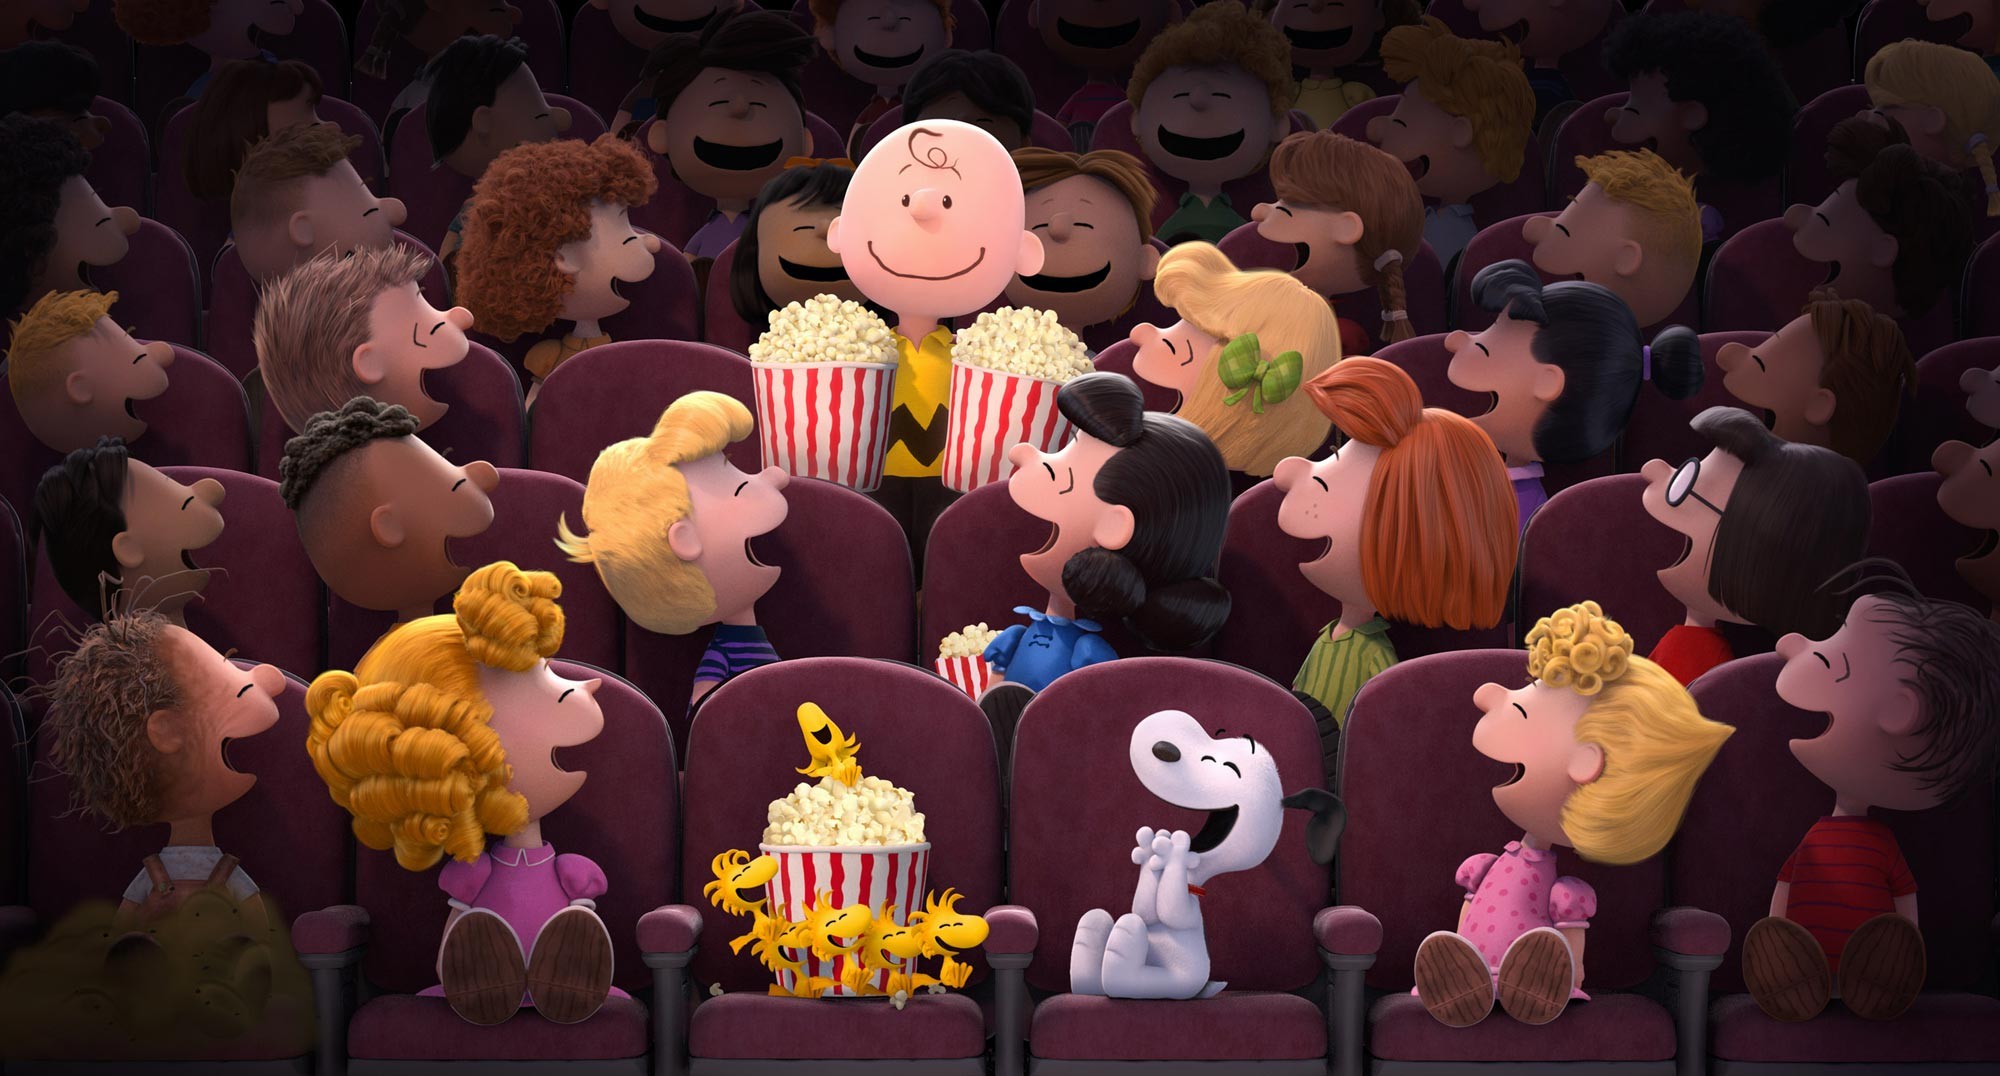 The Peanuts Movie Pics, Movie Collection